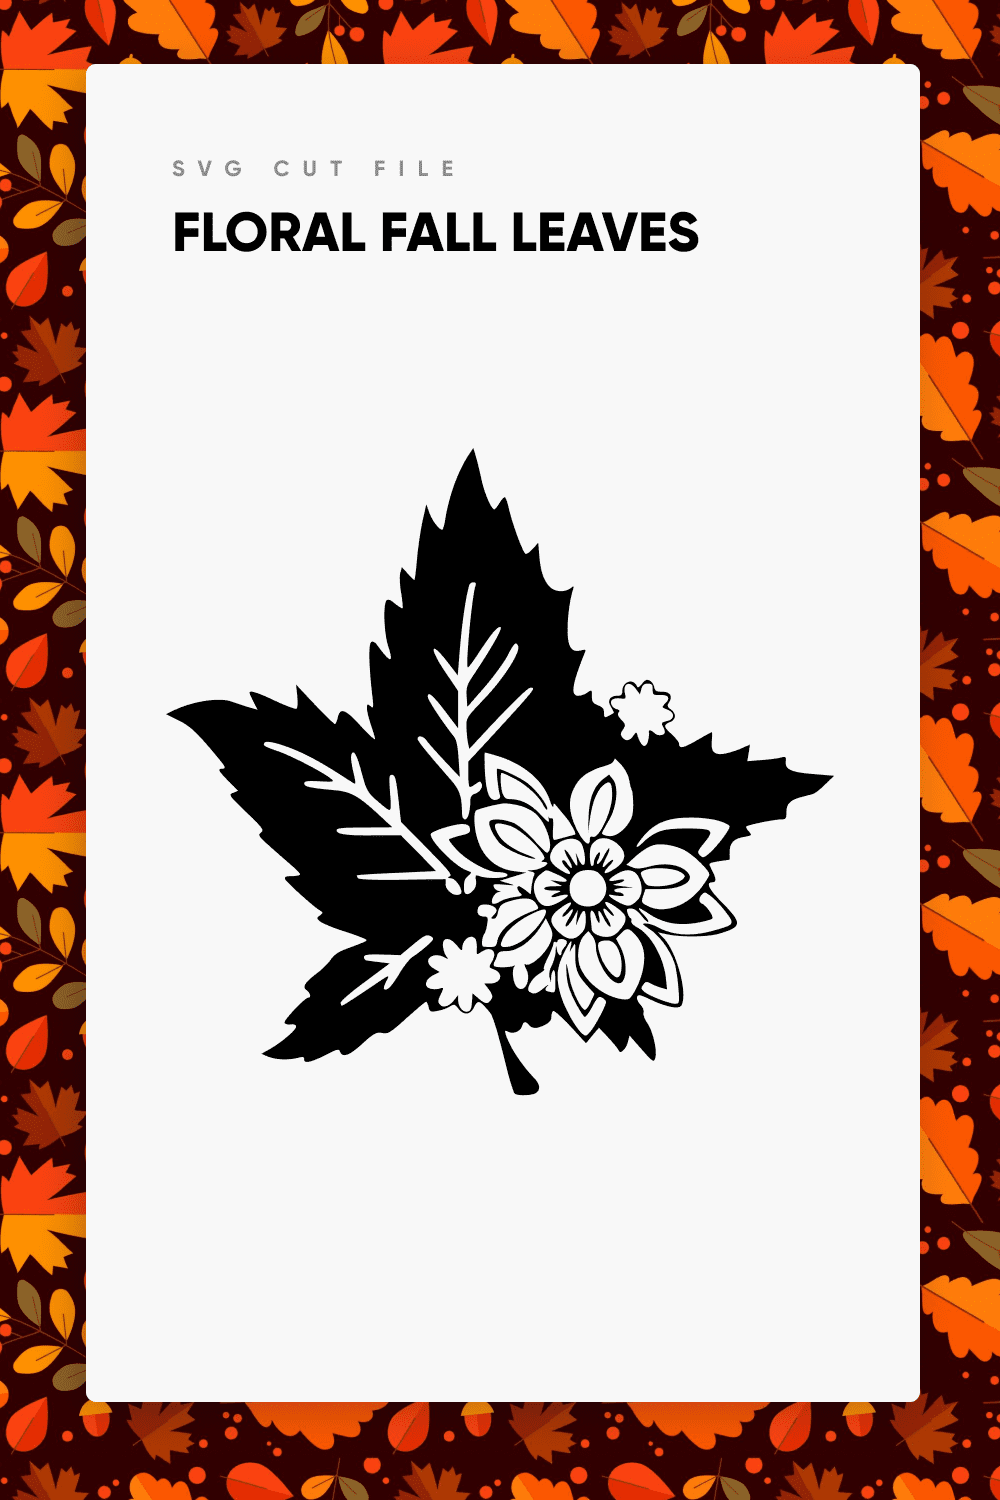 Floral Fall Leaves SVG - preview image.